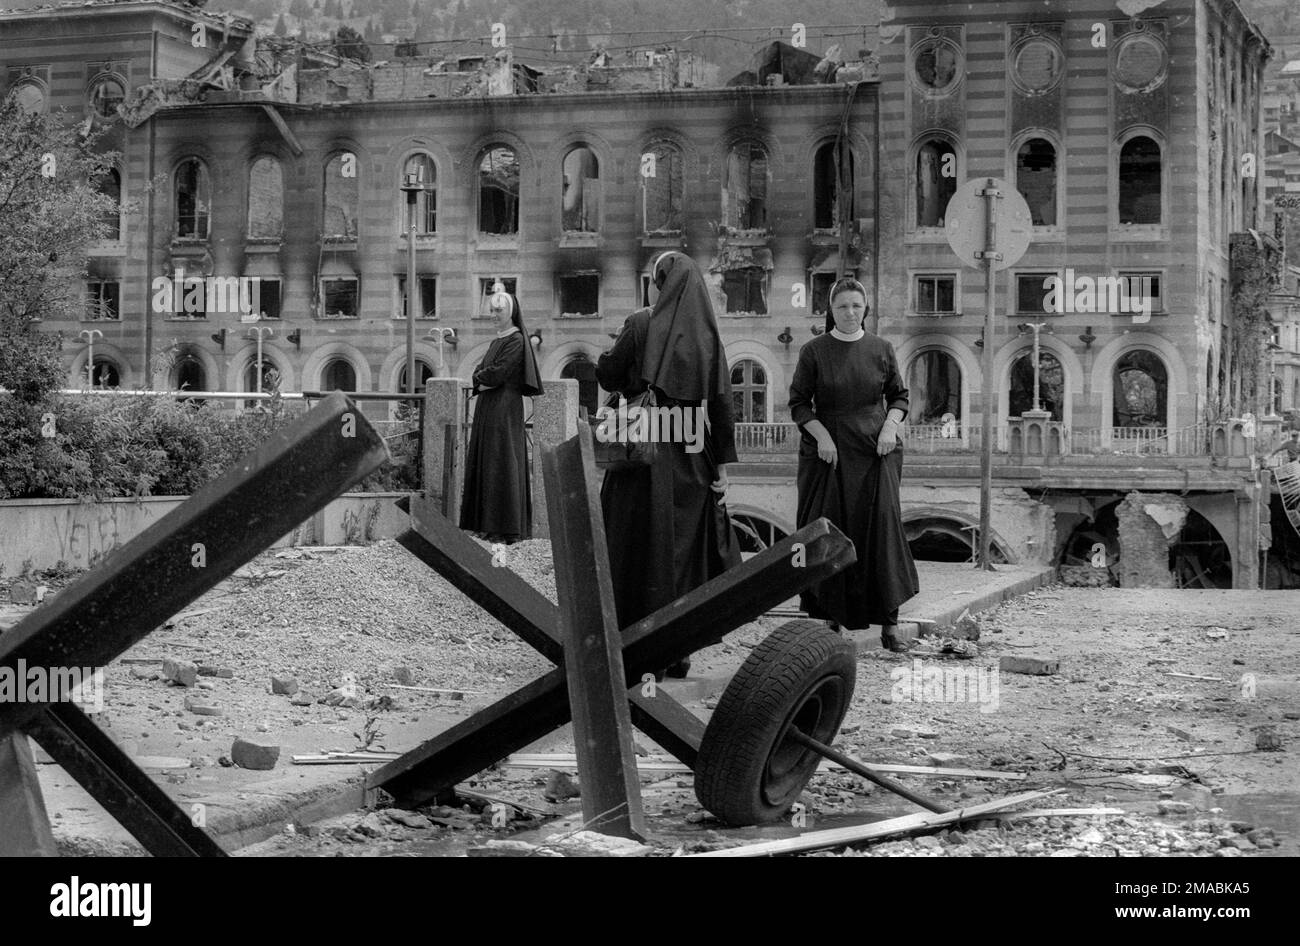 22.06.1992, Bosnia and Herzegovina, Canton Herzegovina-Neretva, Mostar - Bosnian war. End of the first siege of Mostar. Nuns stand in front of the des Stock Photo